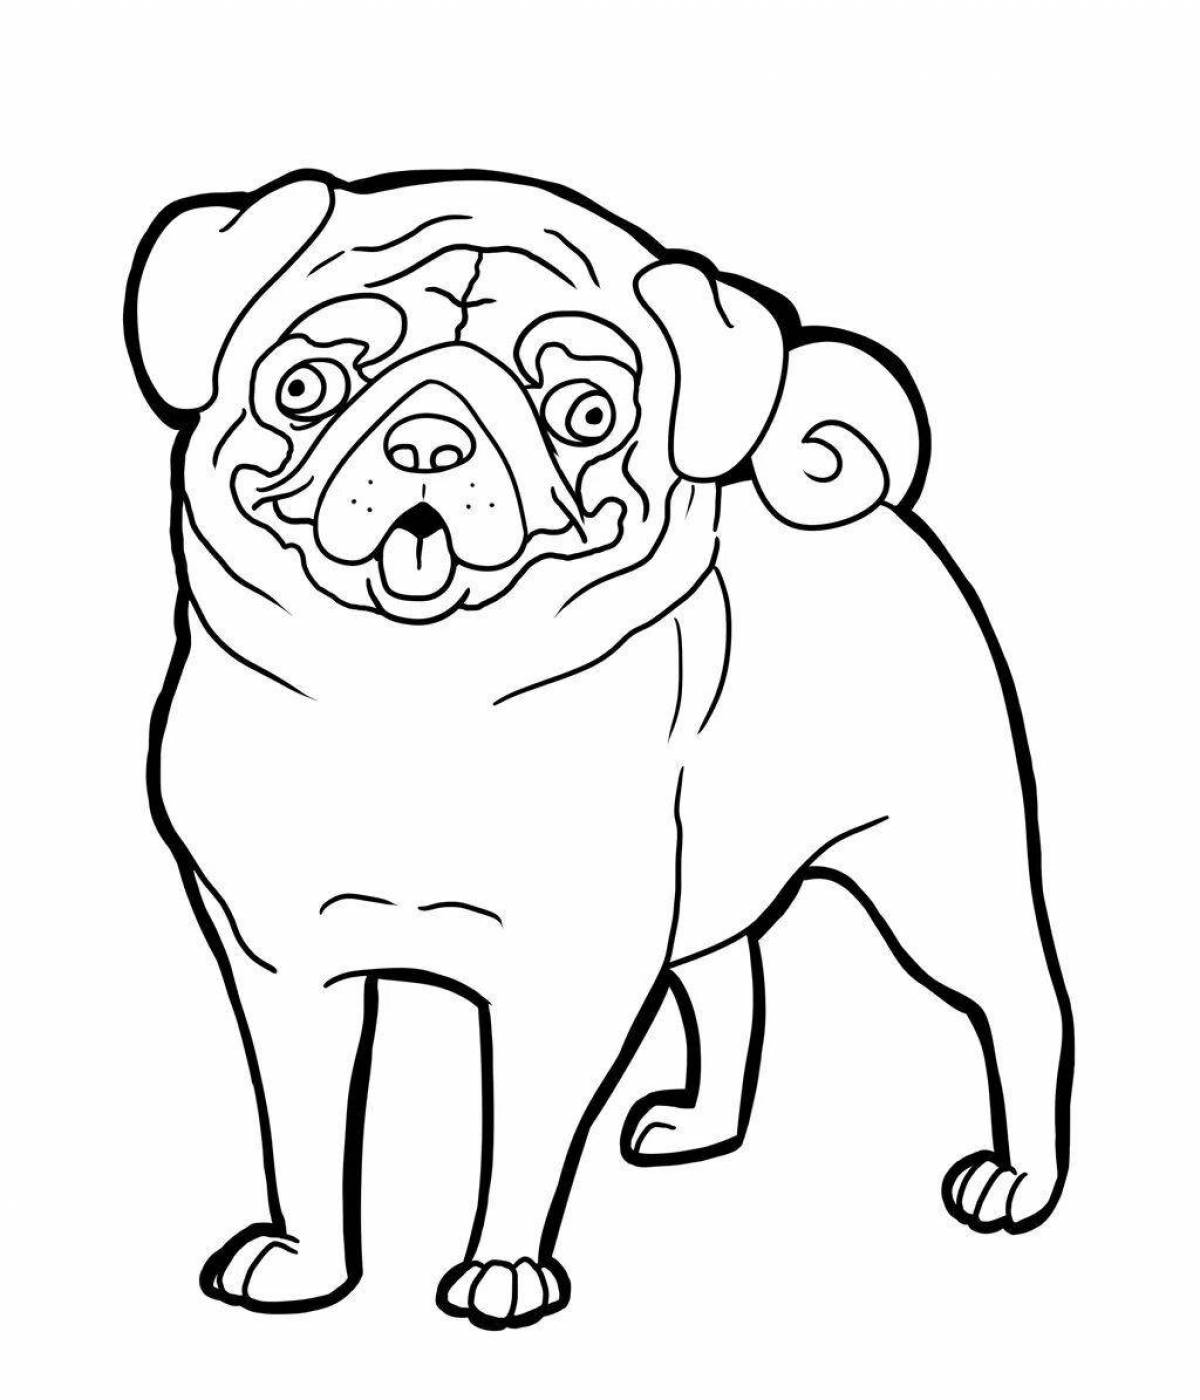 Exciting pug coloring for kids